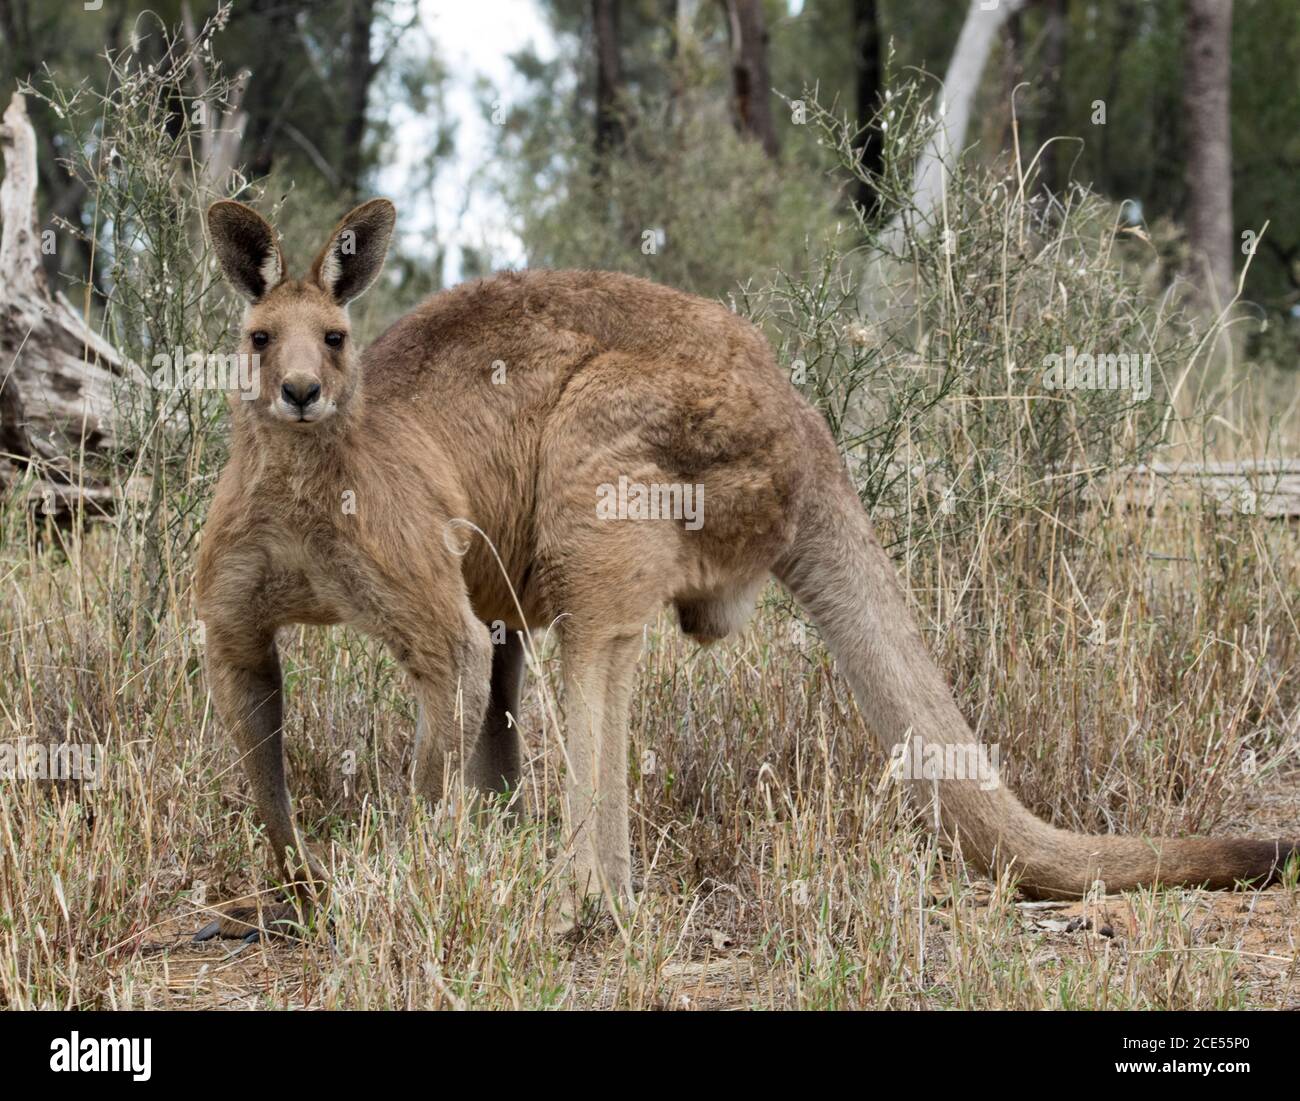 Large male Australian Eastern grey kangaroo, in the wild, with background of tall grasses & trees, staring at camera with alert expression Stock Photo